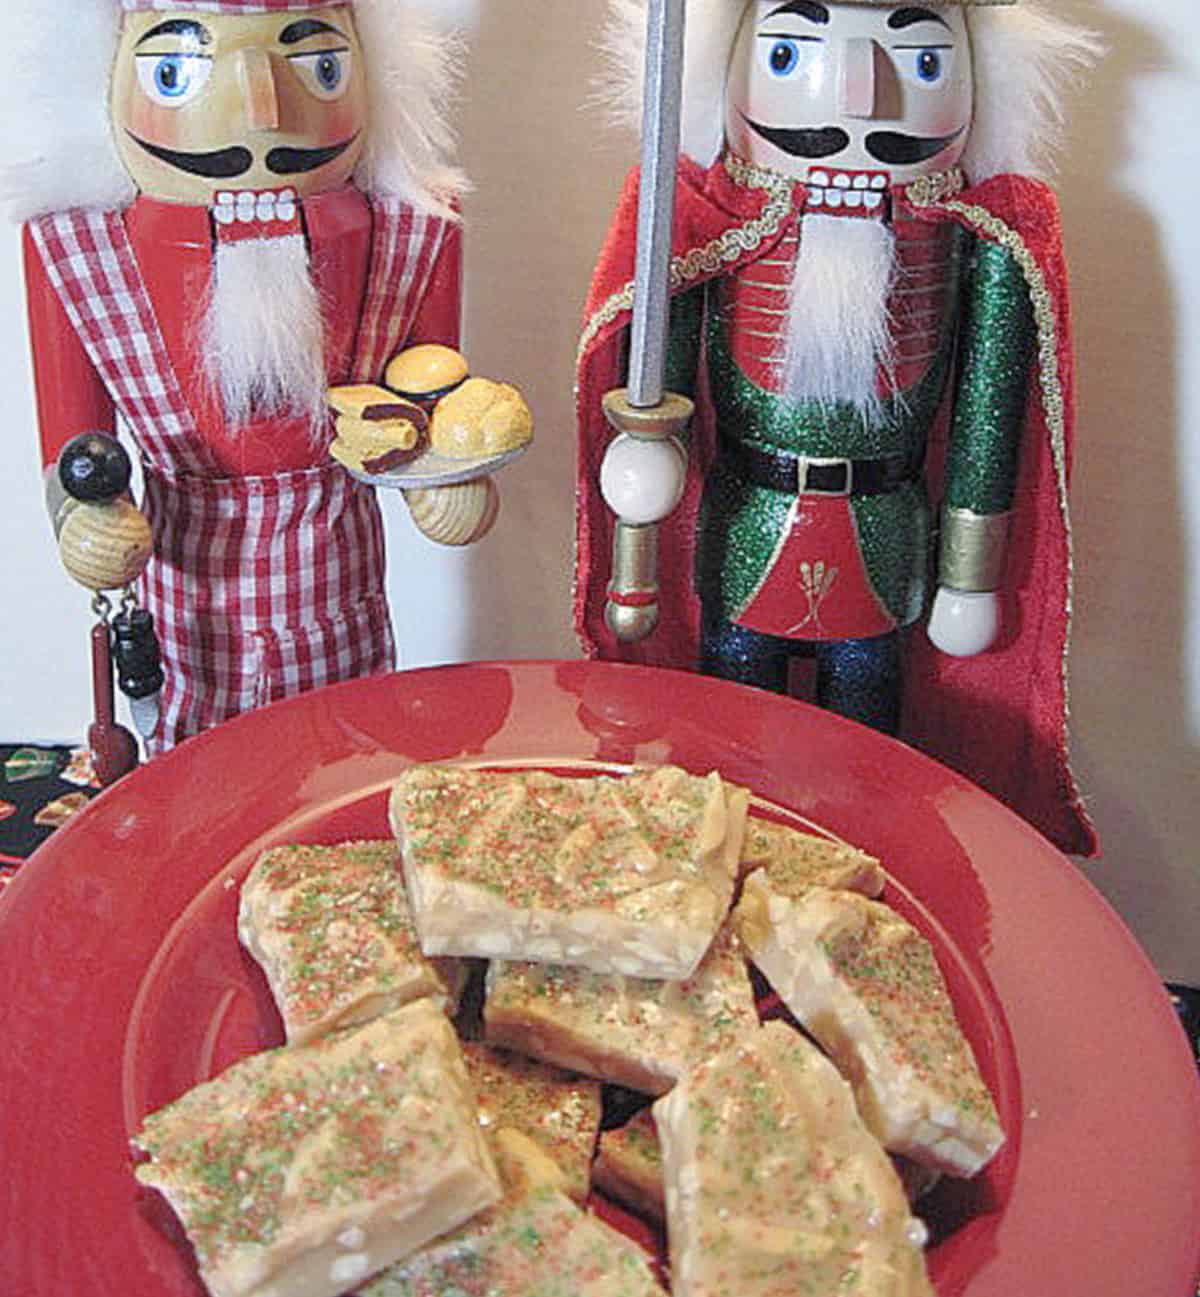 Two nutcrackers standing behind a plate of Almond Butter Crunch Candy.